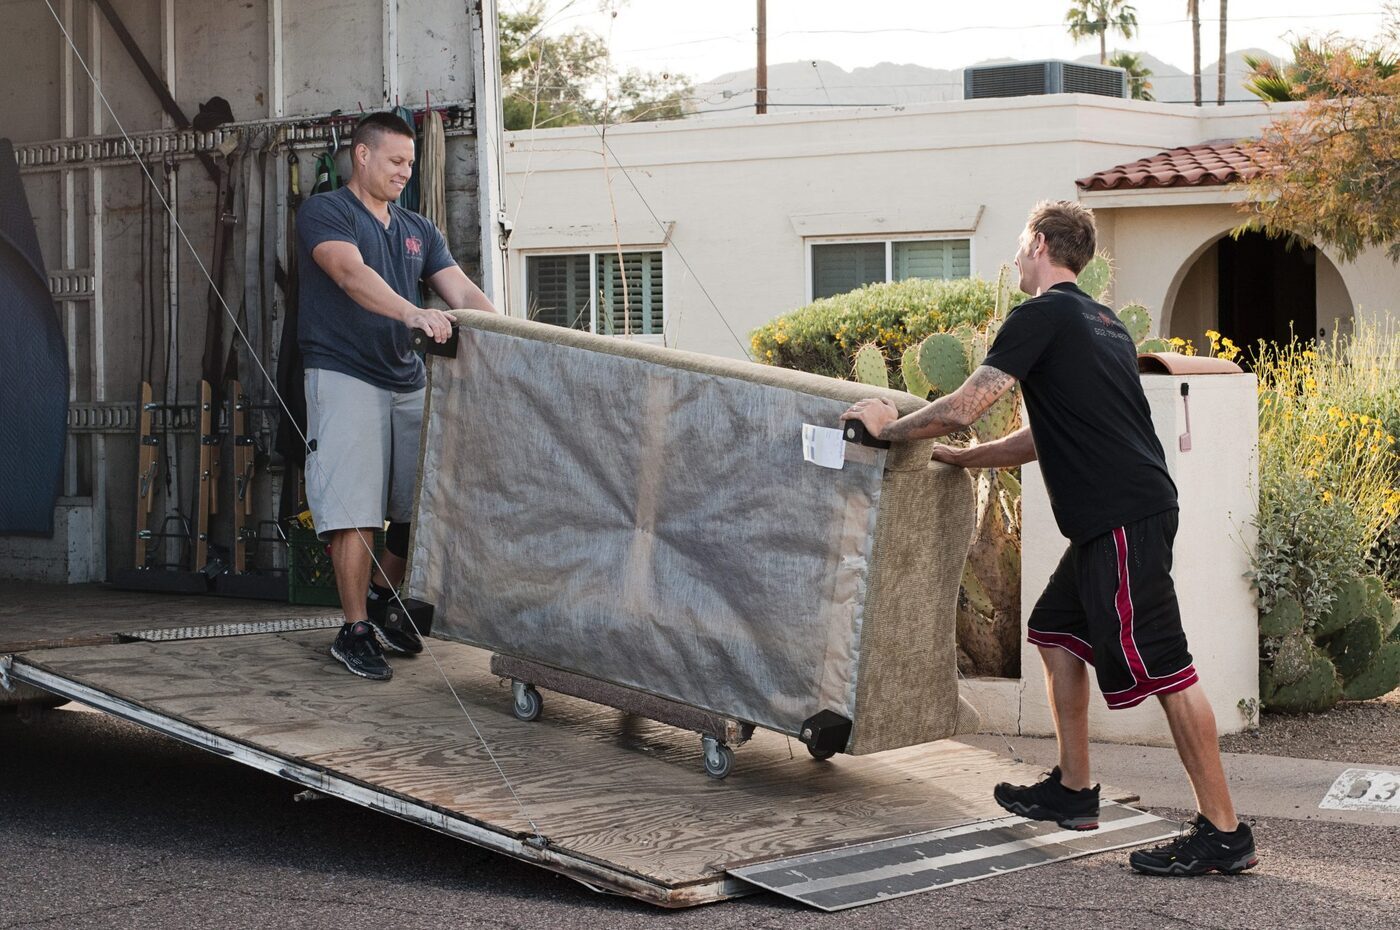 Champion Movers is set to become the Lafayette and Manteca Moving Company